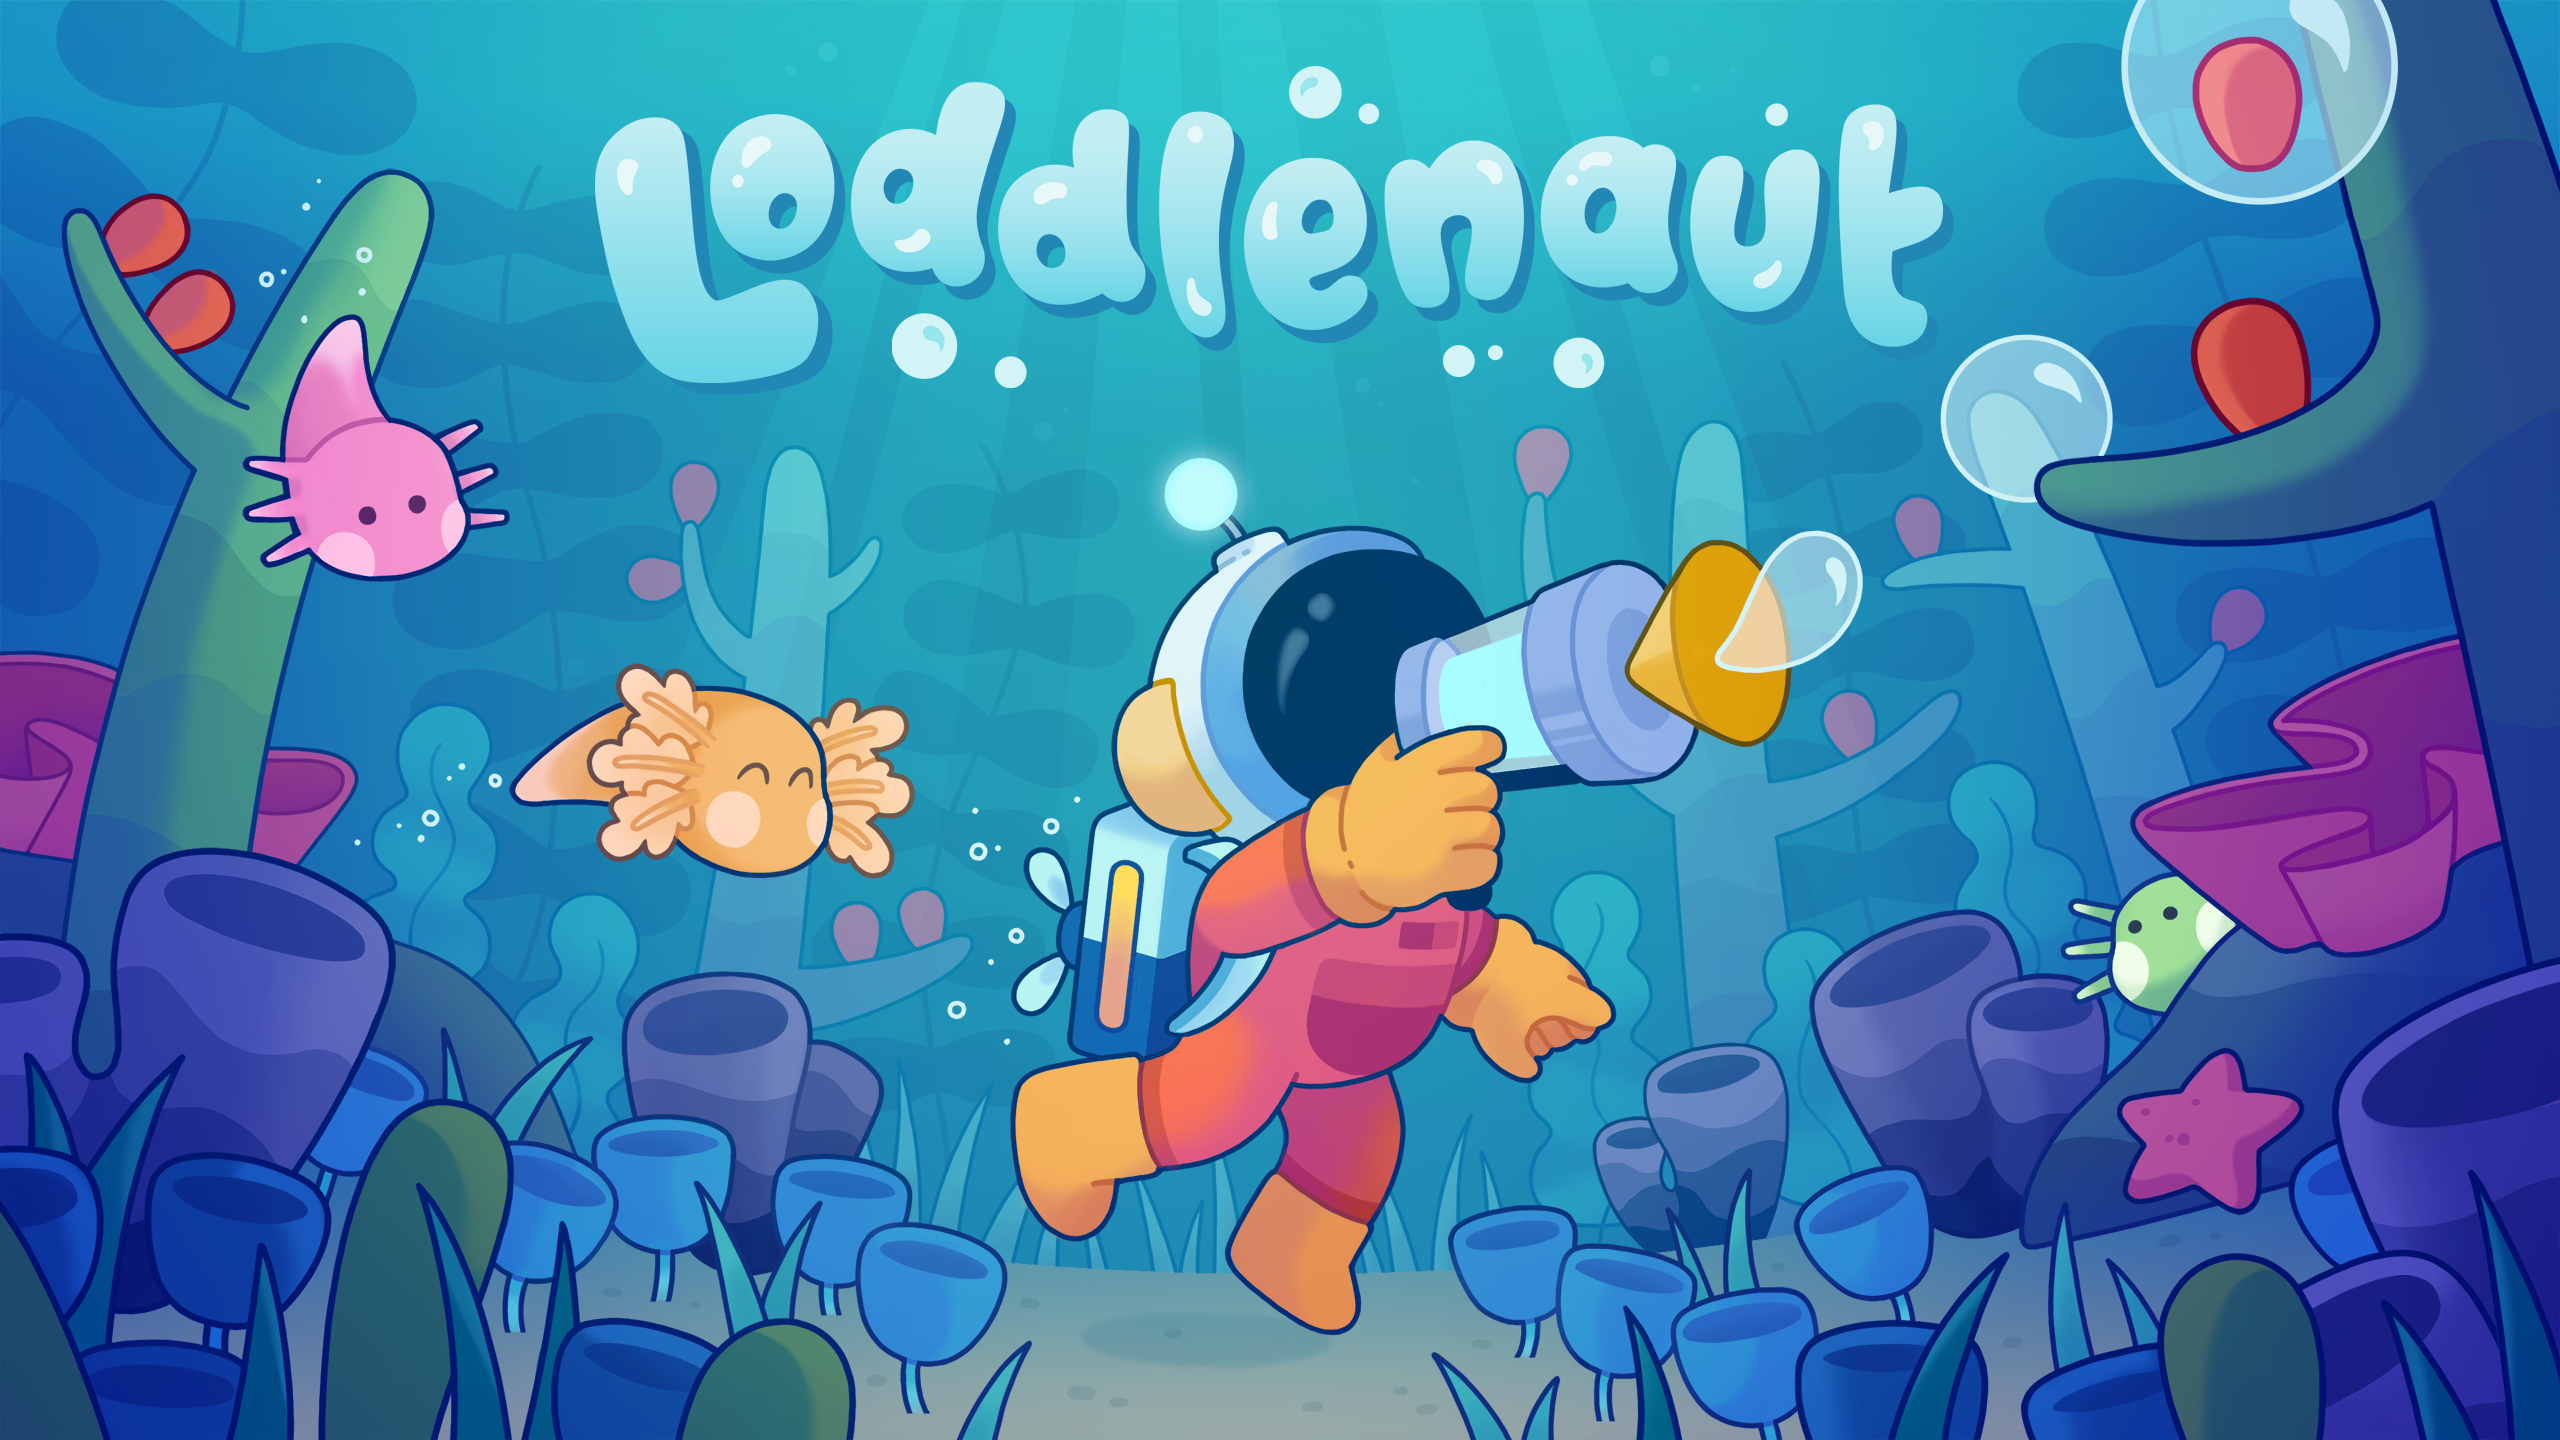 A promotional image for Loddlenaut